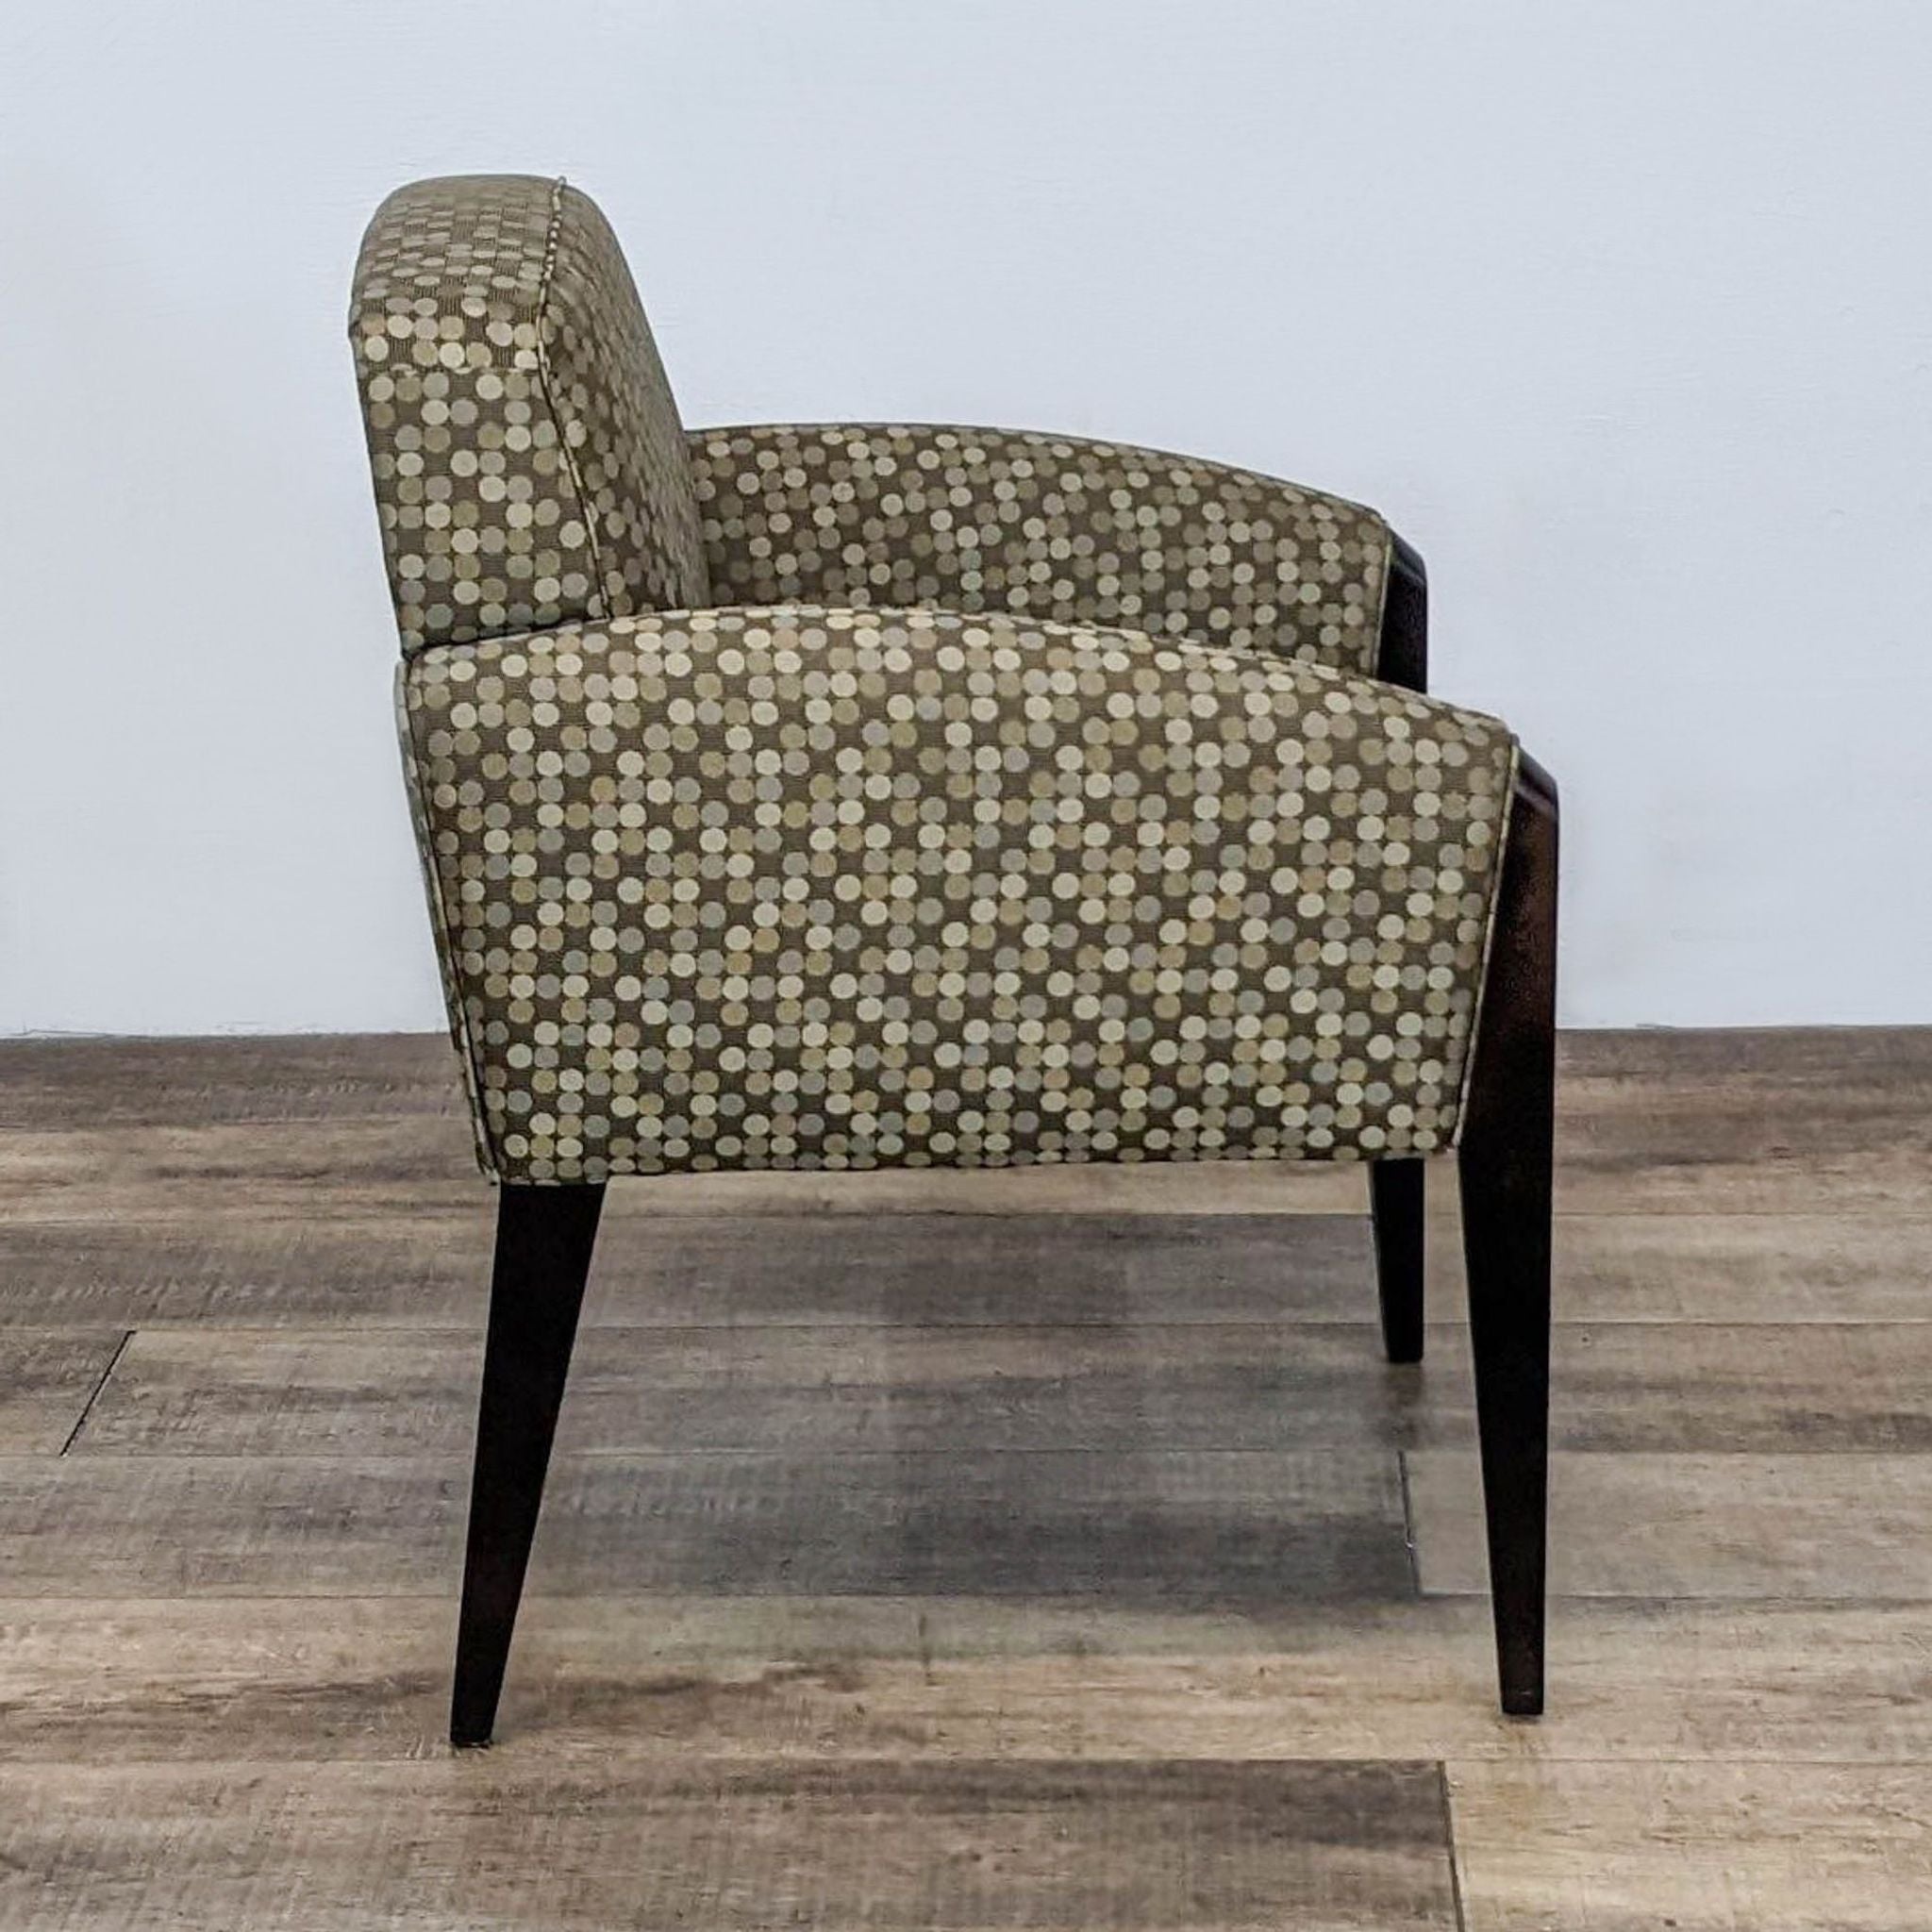 Side view of a contemporary Haworth Galerie lounge chair with a geometric pattern and sleek wood legs.